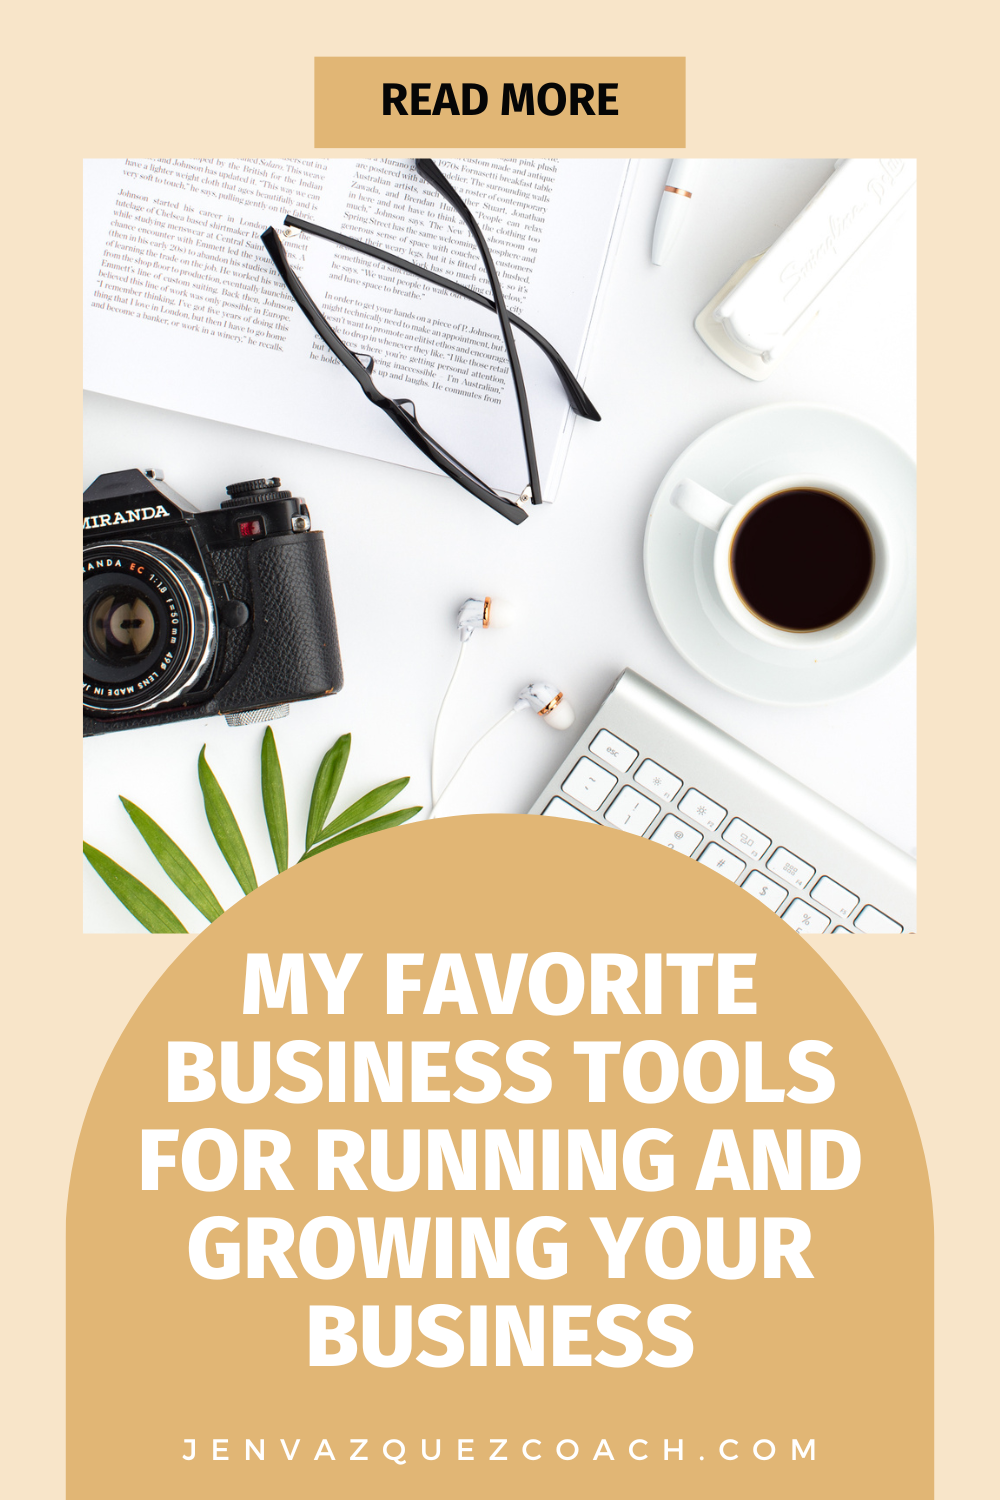 My Favorite Business Tools for Running and Growing Your Business